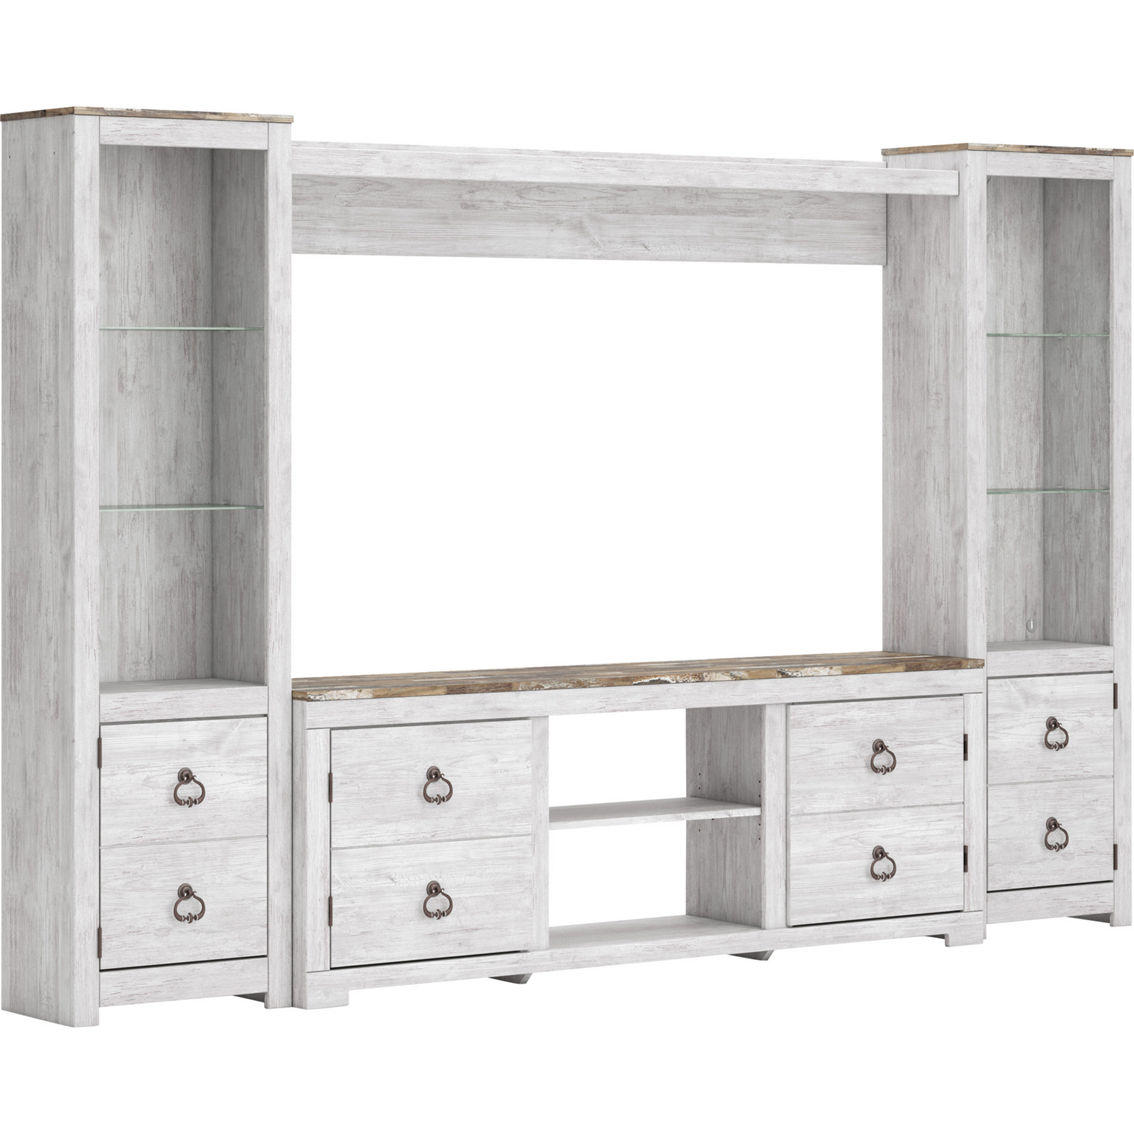 Signature Design by Ashley Willowton Entertainment Center 4 pc. - Image 2 of 5